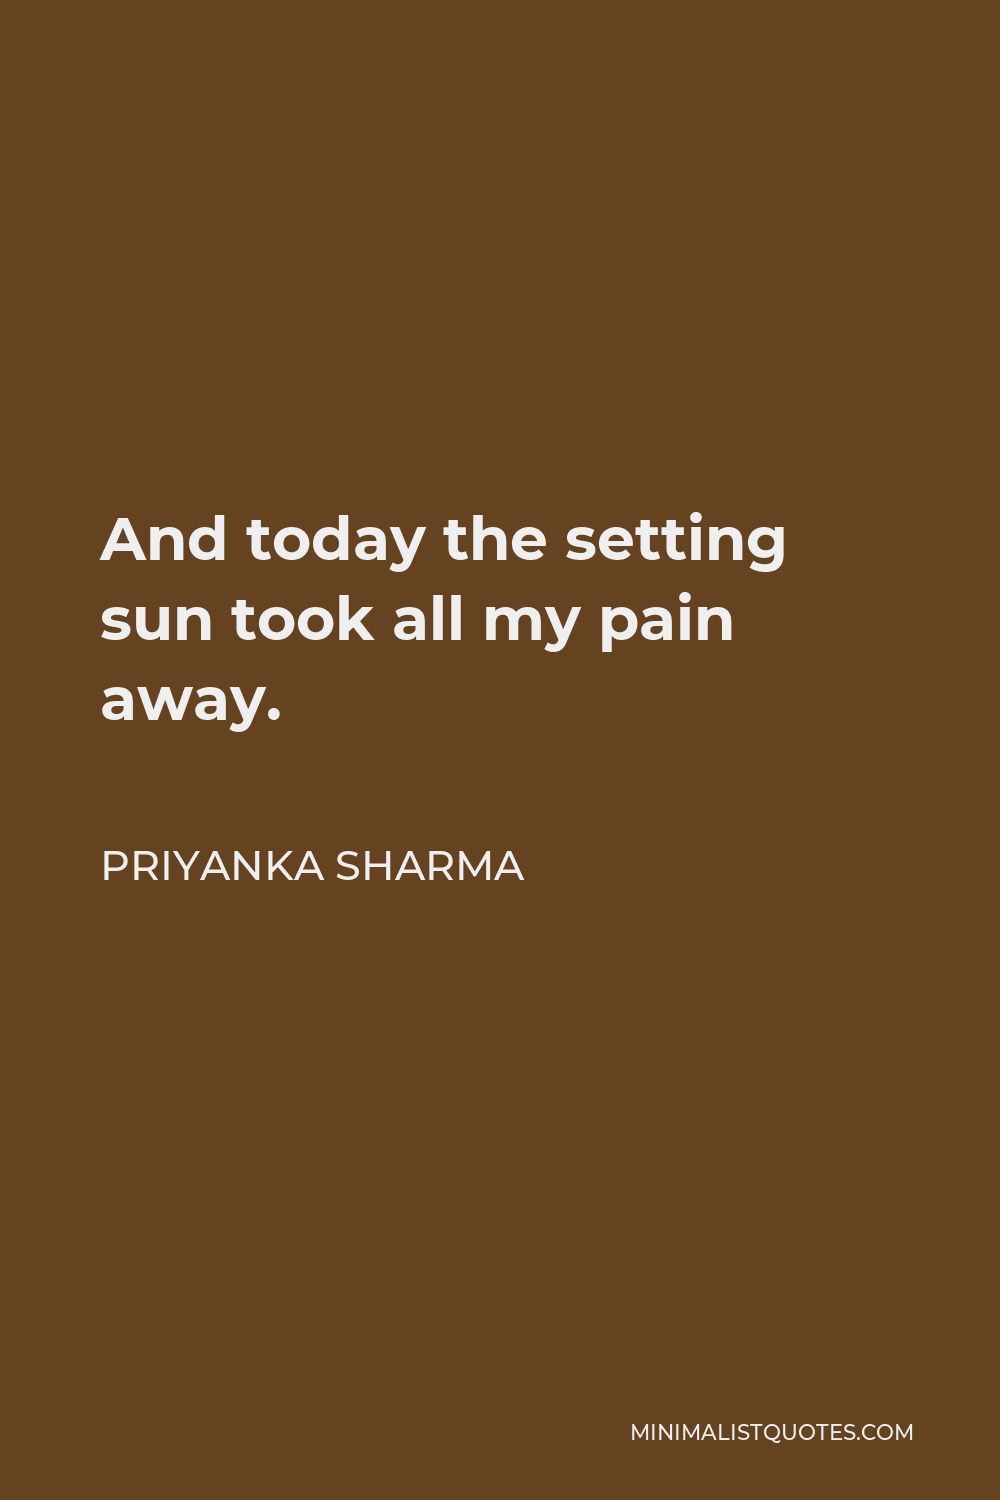 Priyanka Sharma Quote - And today the setting sun took all my pain away.